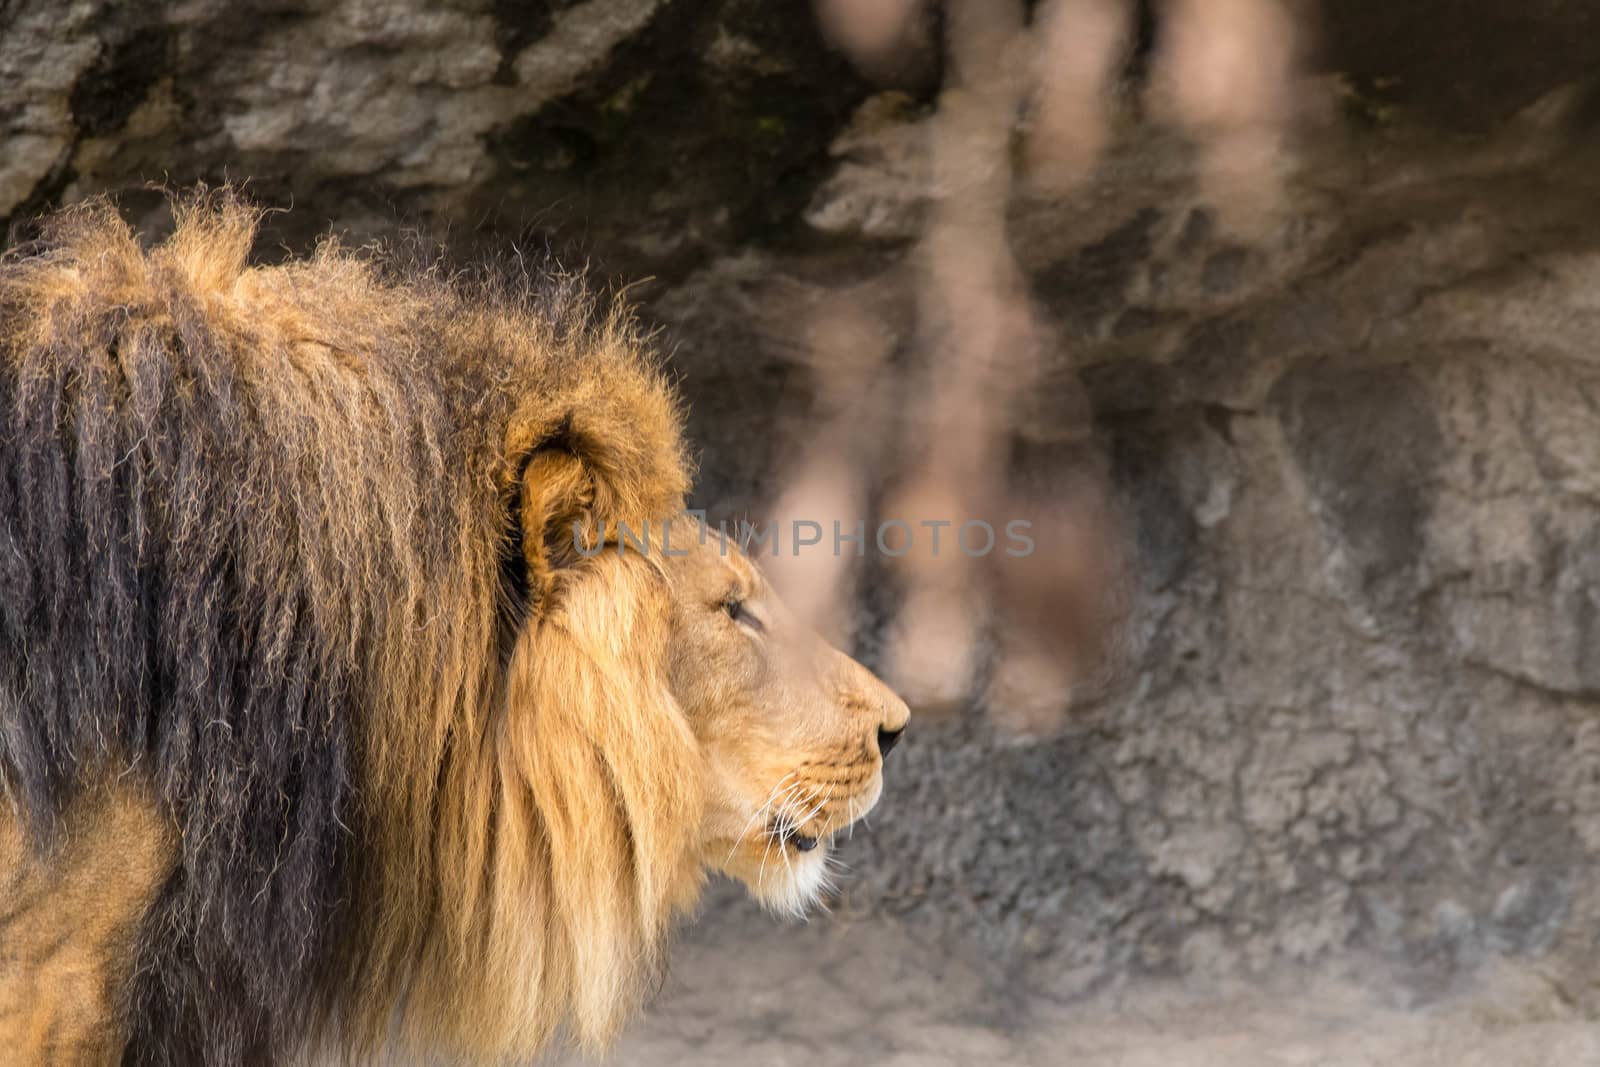 Lion at Zoo by cestes001